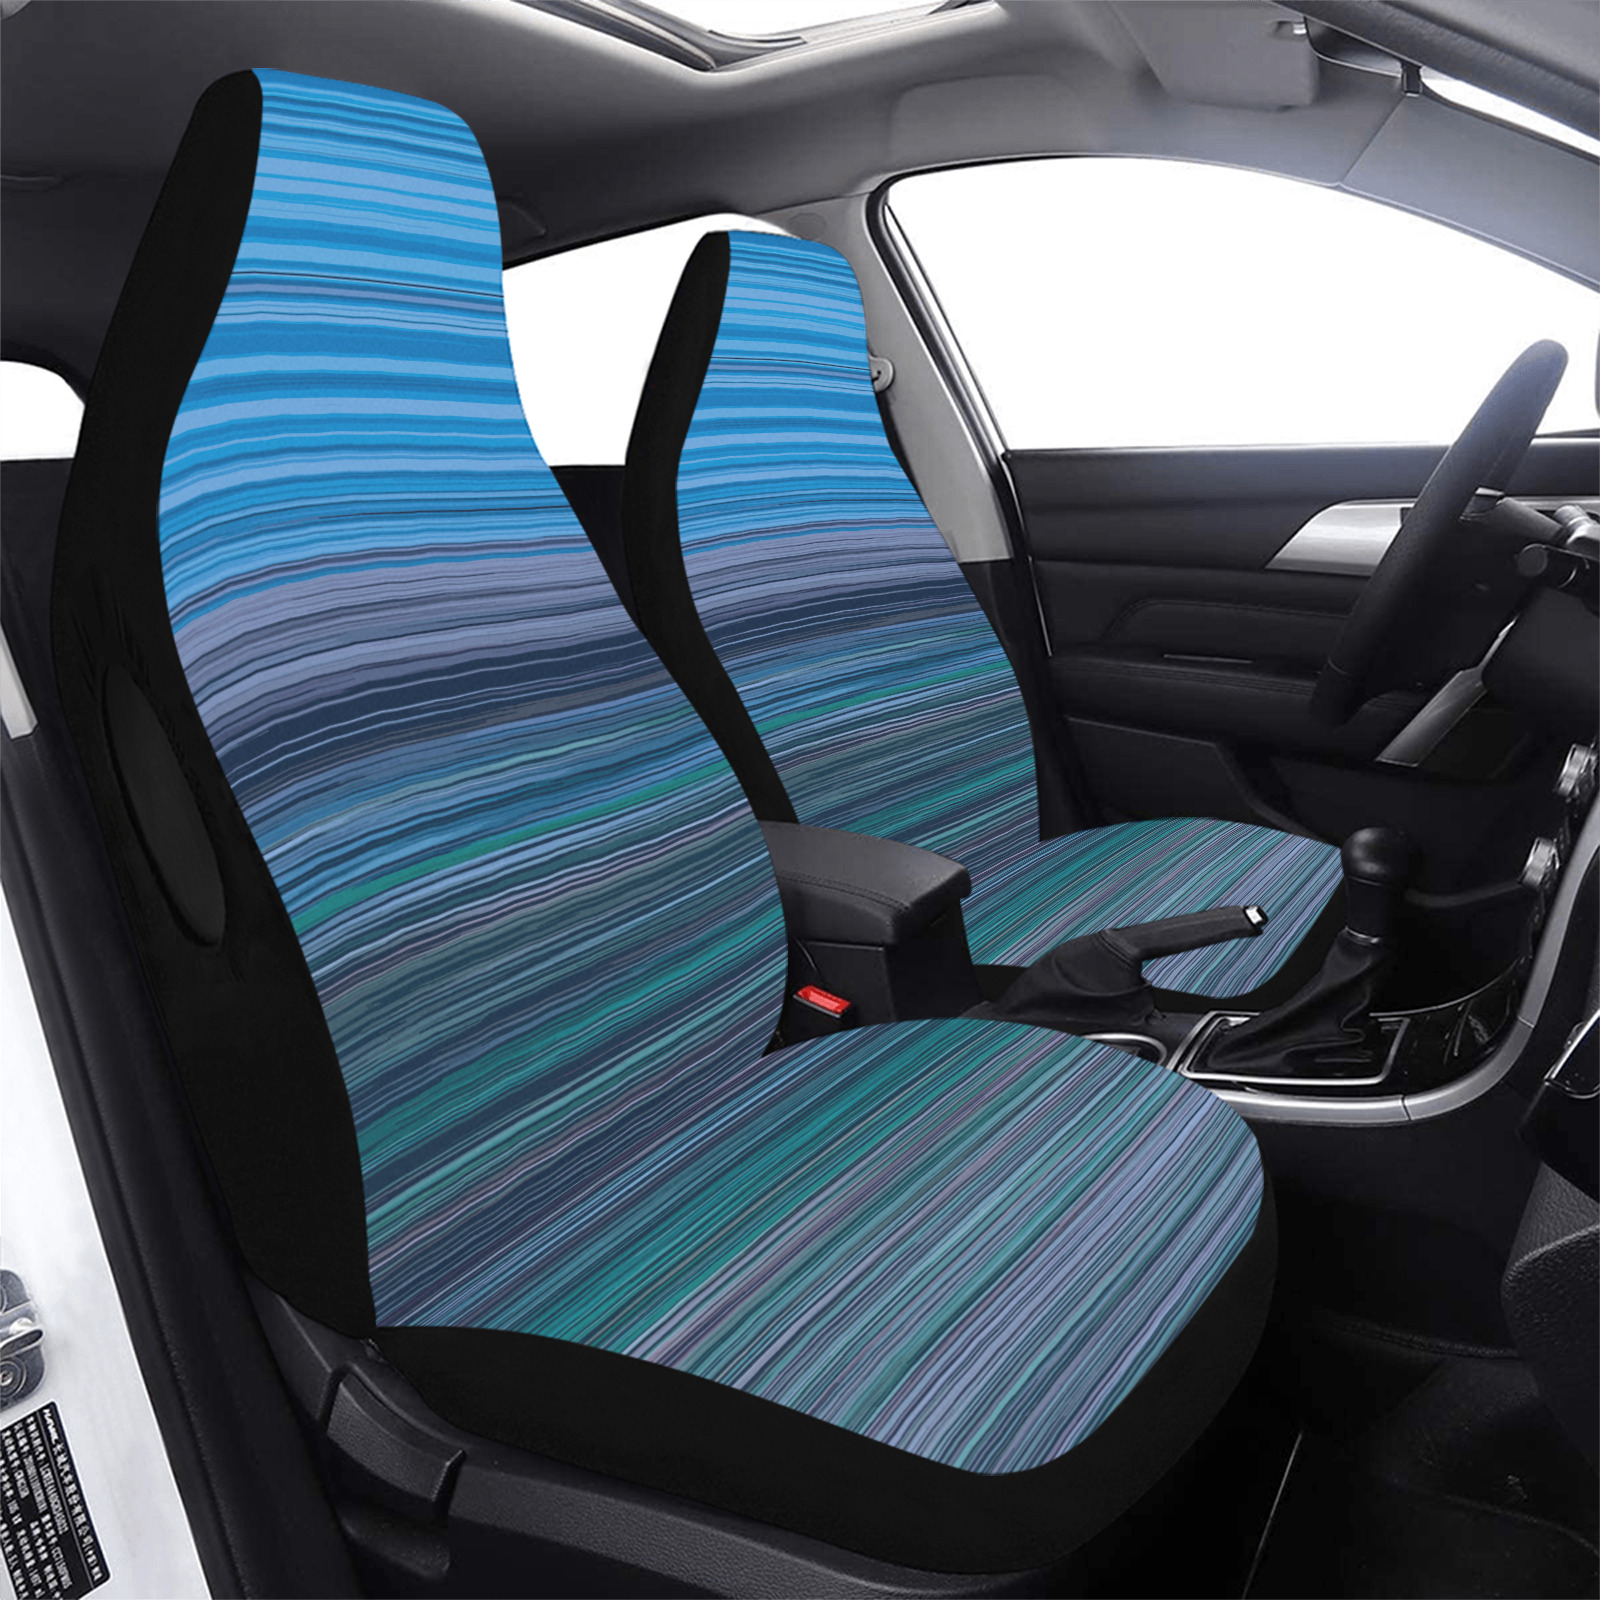 Abstract Blue Horizontal Stripes Car Seat Cover Airbag Compatible (Set of 2)